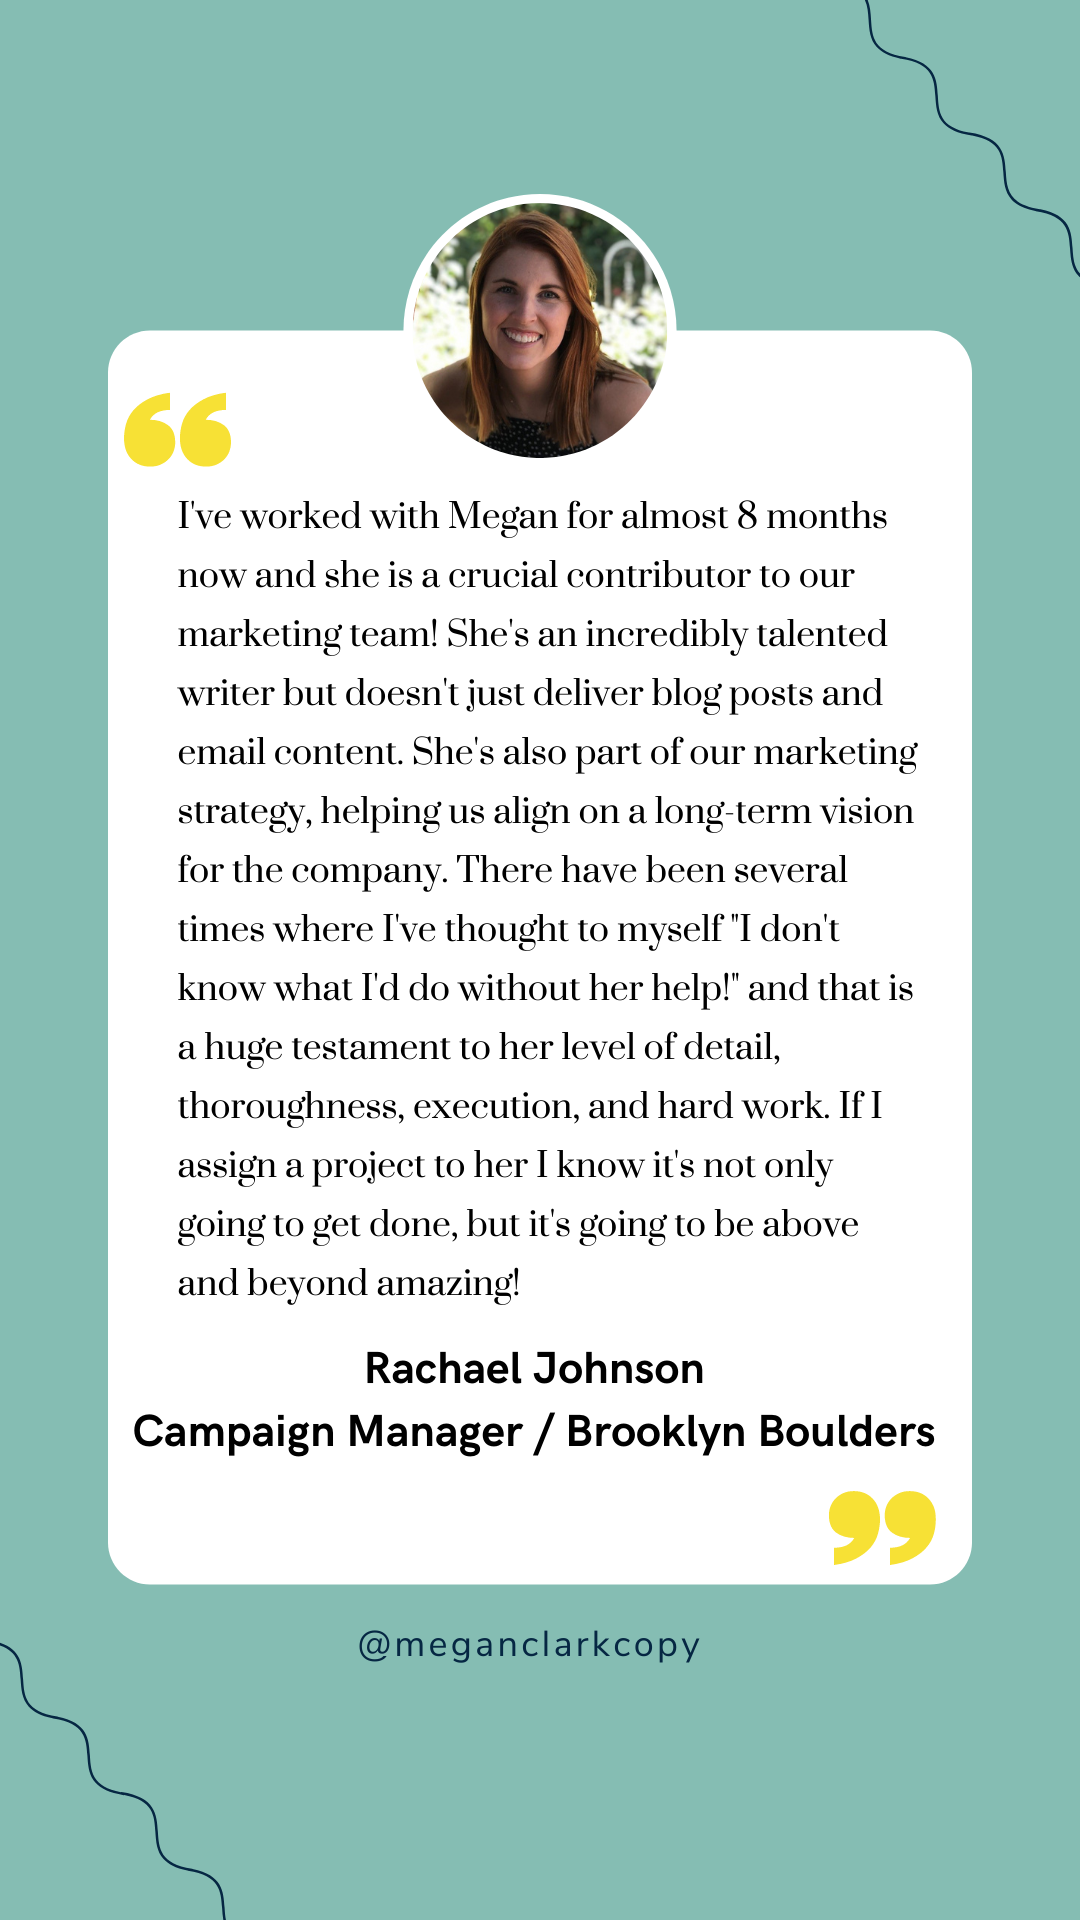 Testimonial from Campaign Manager at Brooklyn Boulders